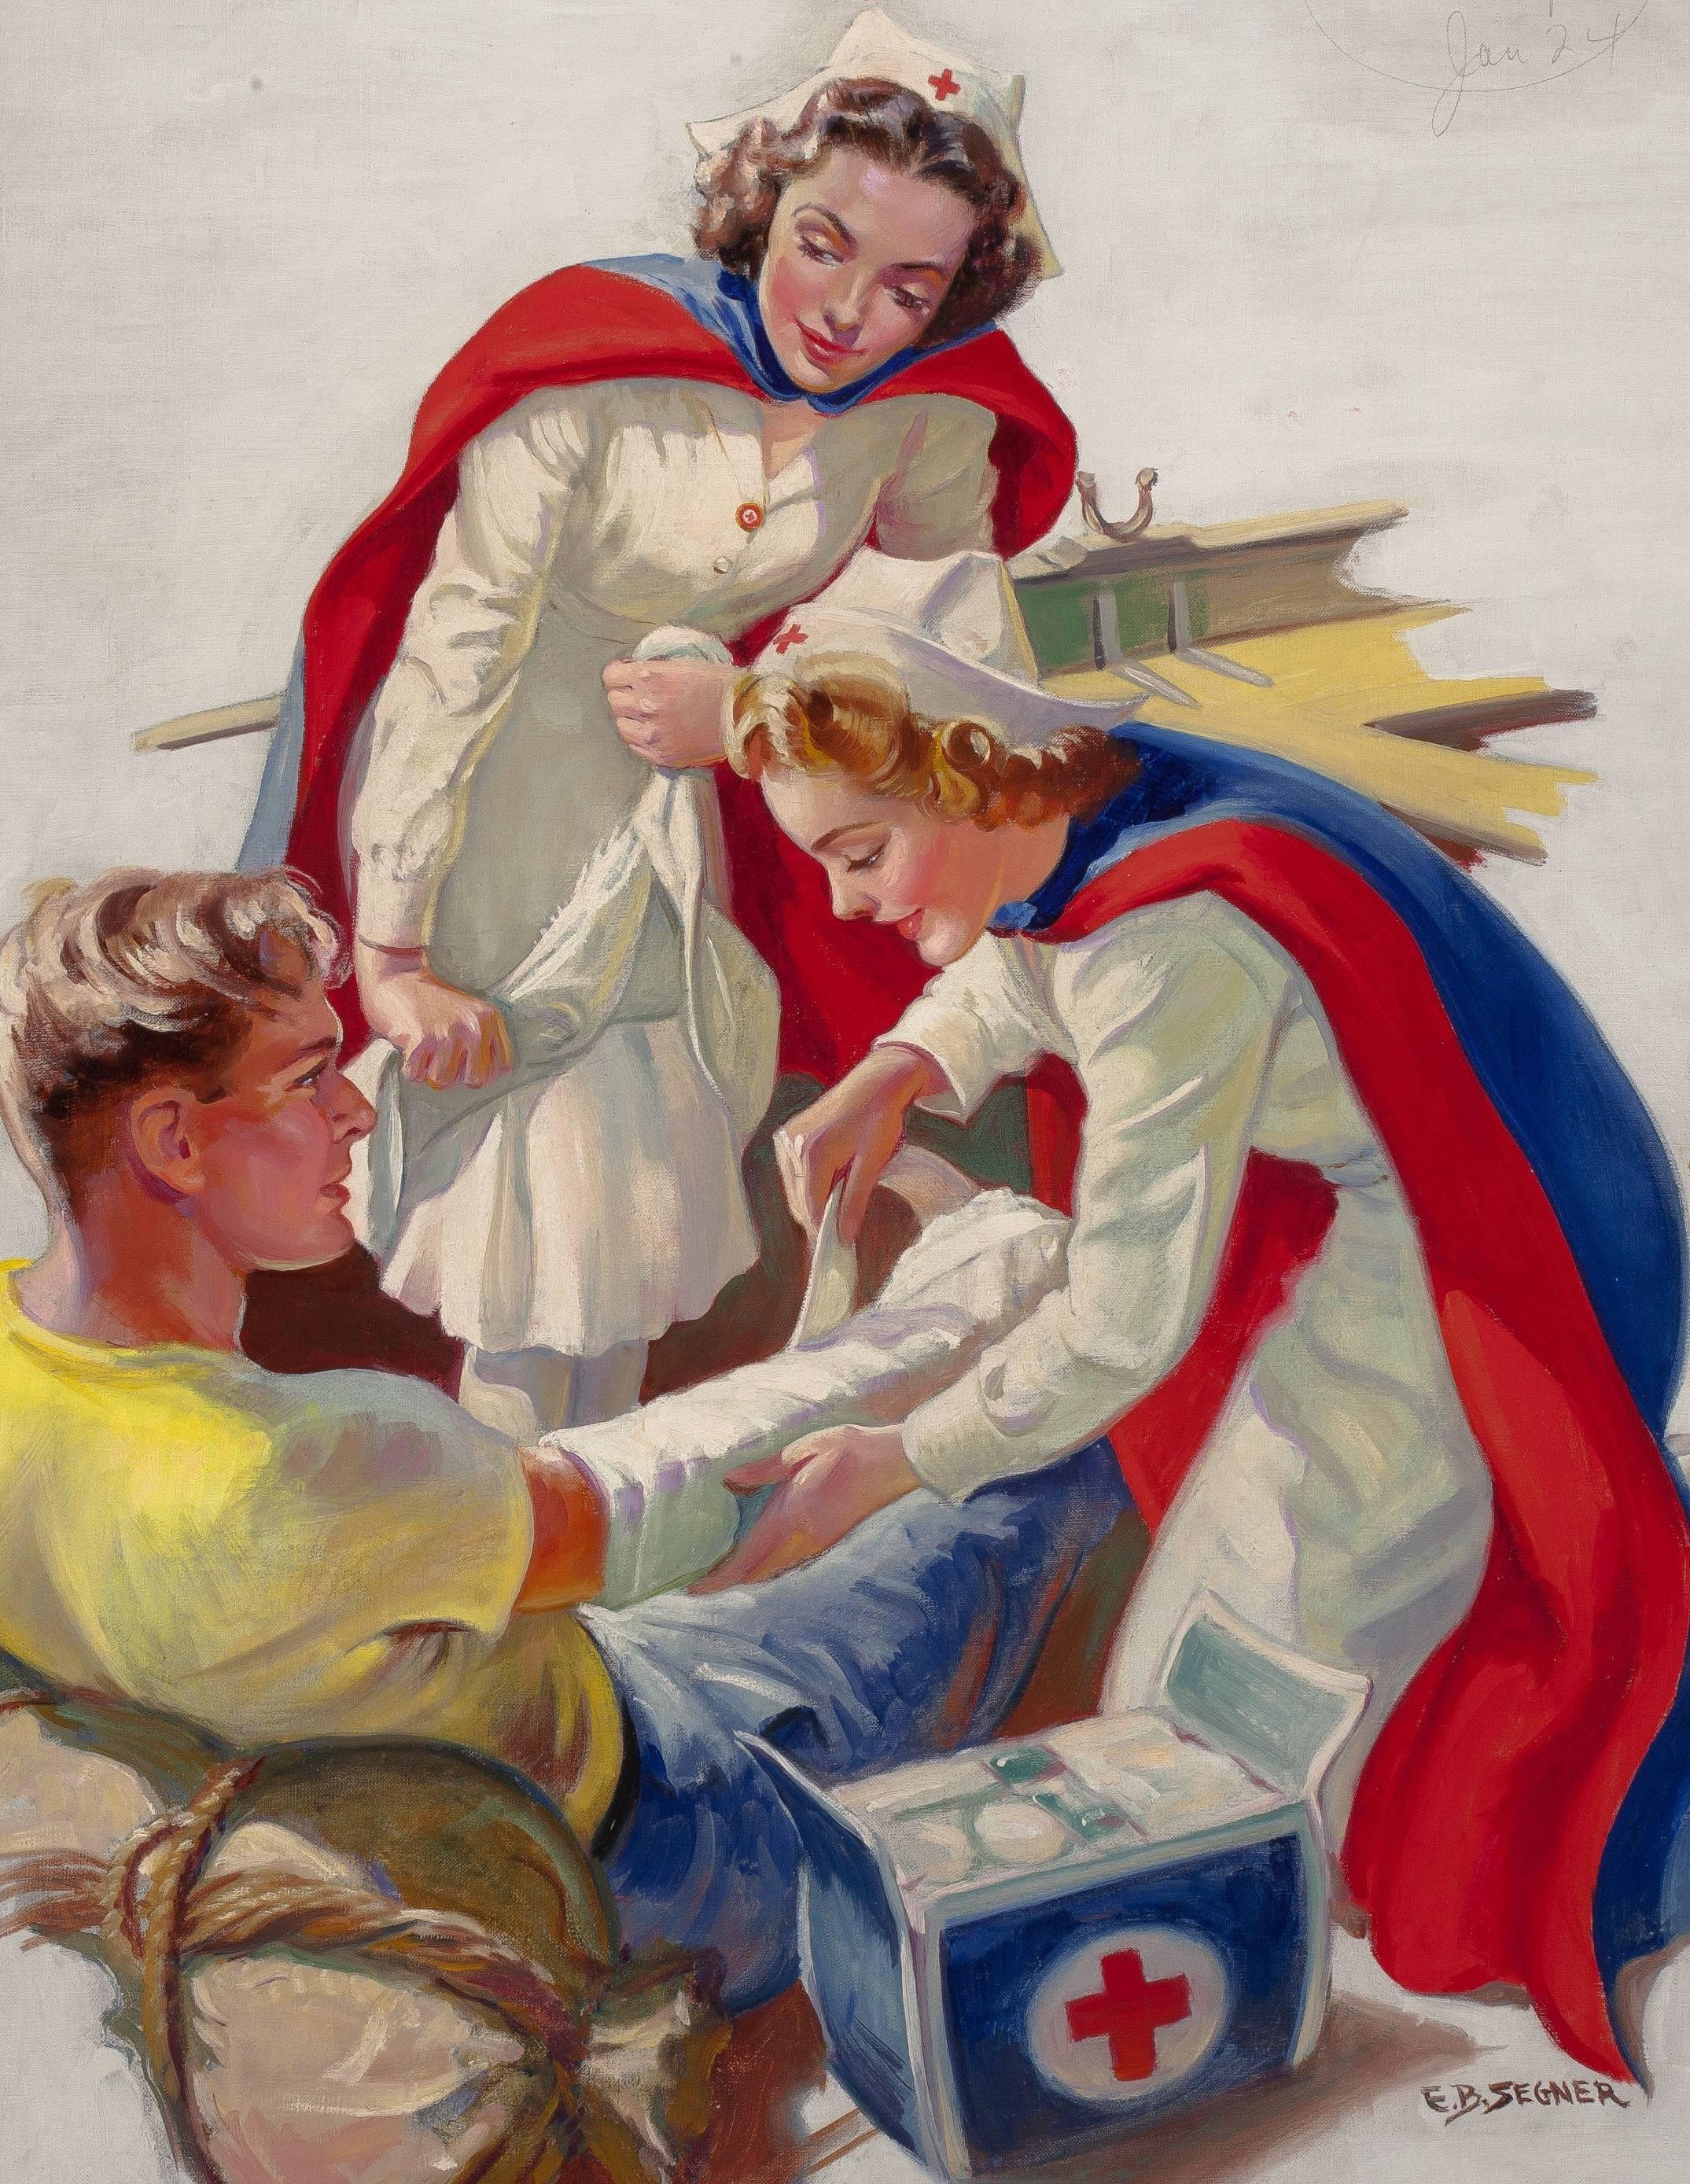 Helping the Wounded, Probable Red Cross Advertisement - Painting by Ellen Barbara Segner